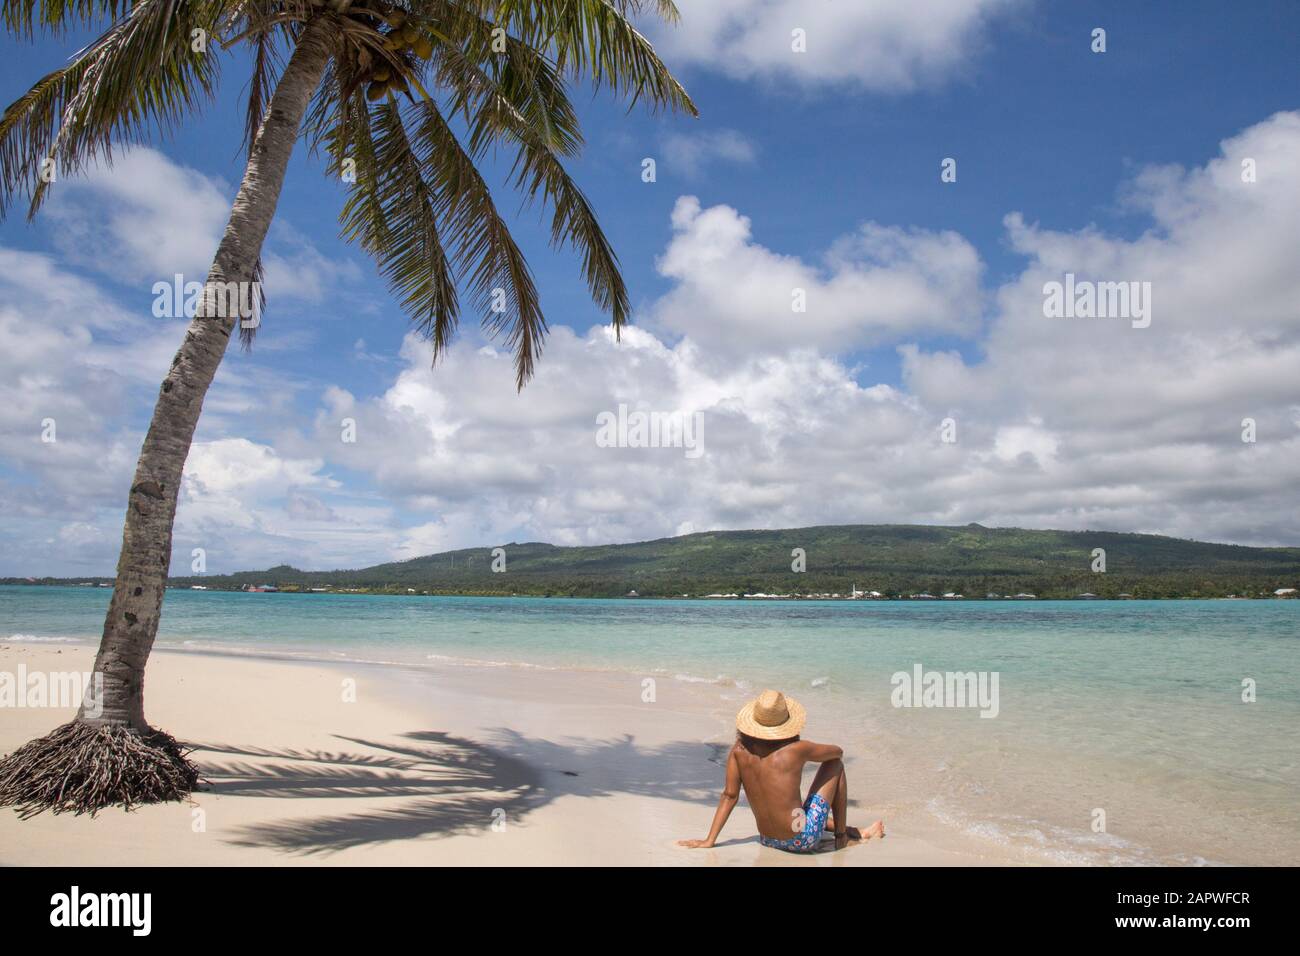 One man, wearing blue swimsuits, under palm tree at white sand beach Stock Photo